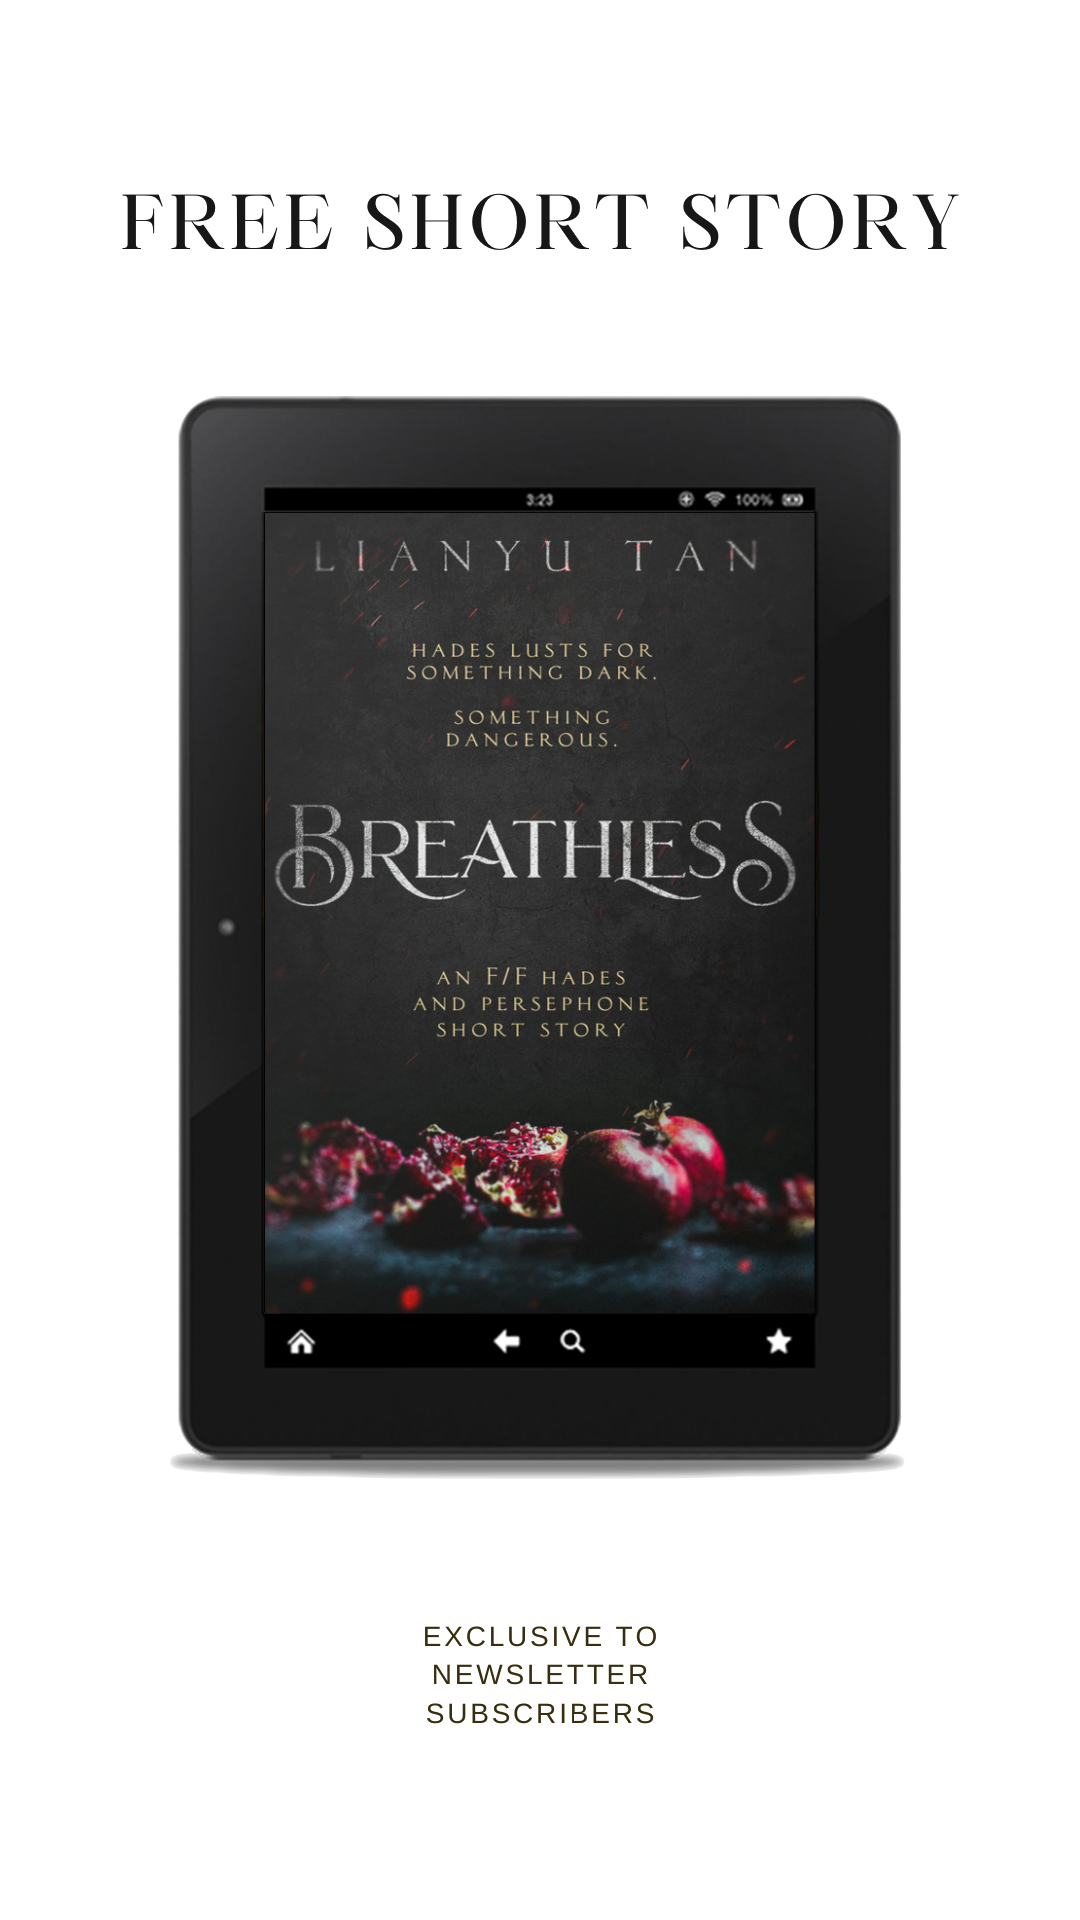 Top: Free short story Middle: Cover image of 'Breathless' by Lianyu Tan on a generic ereader. Bottom: exclusive to newsletter subscribers